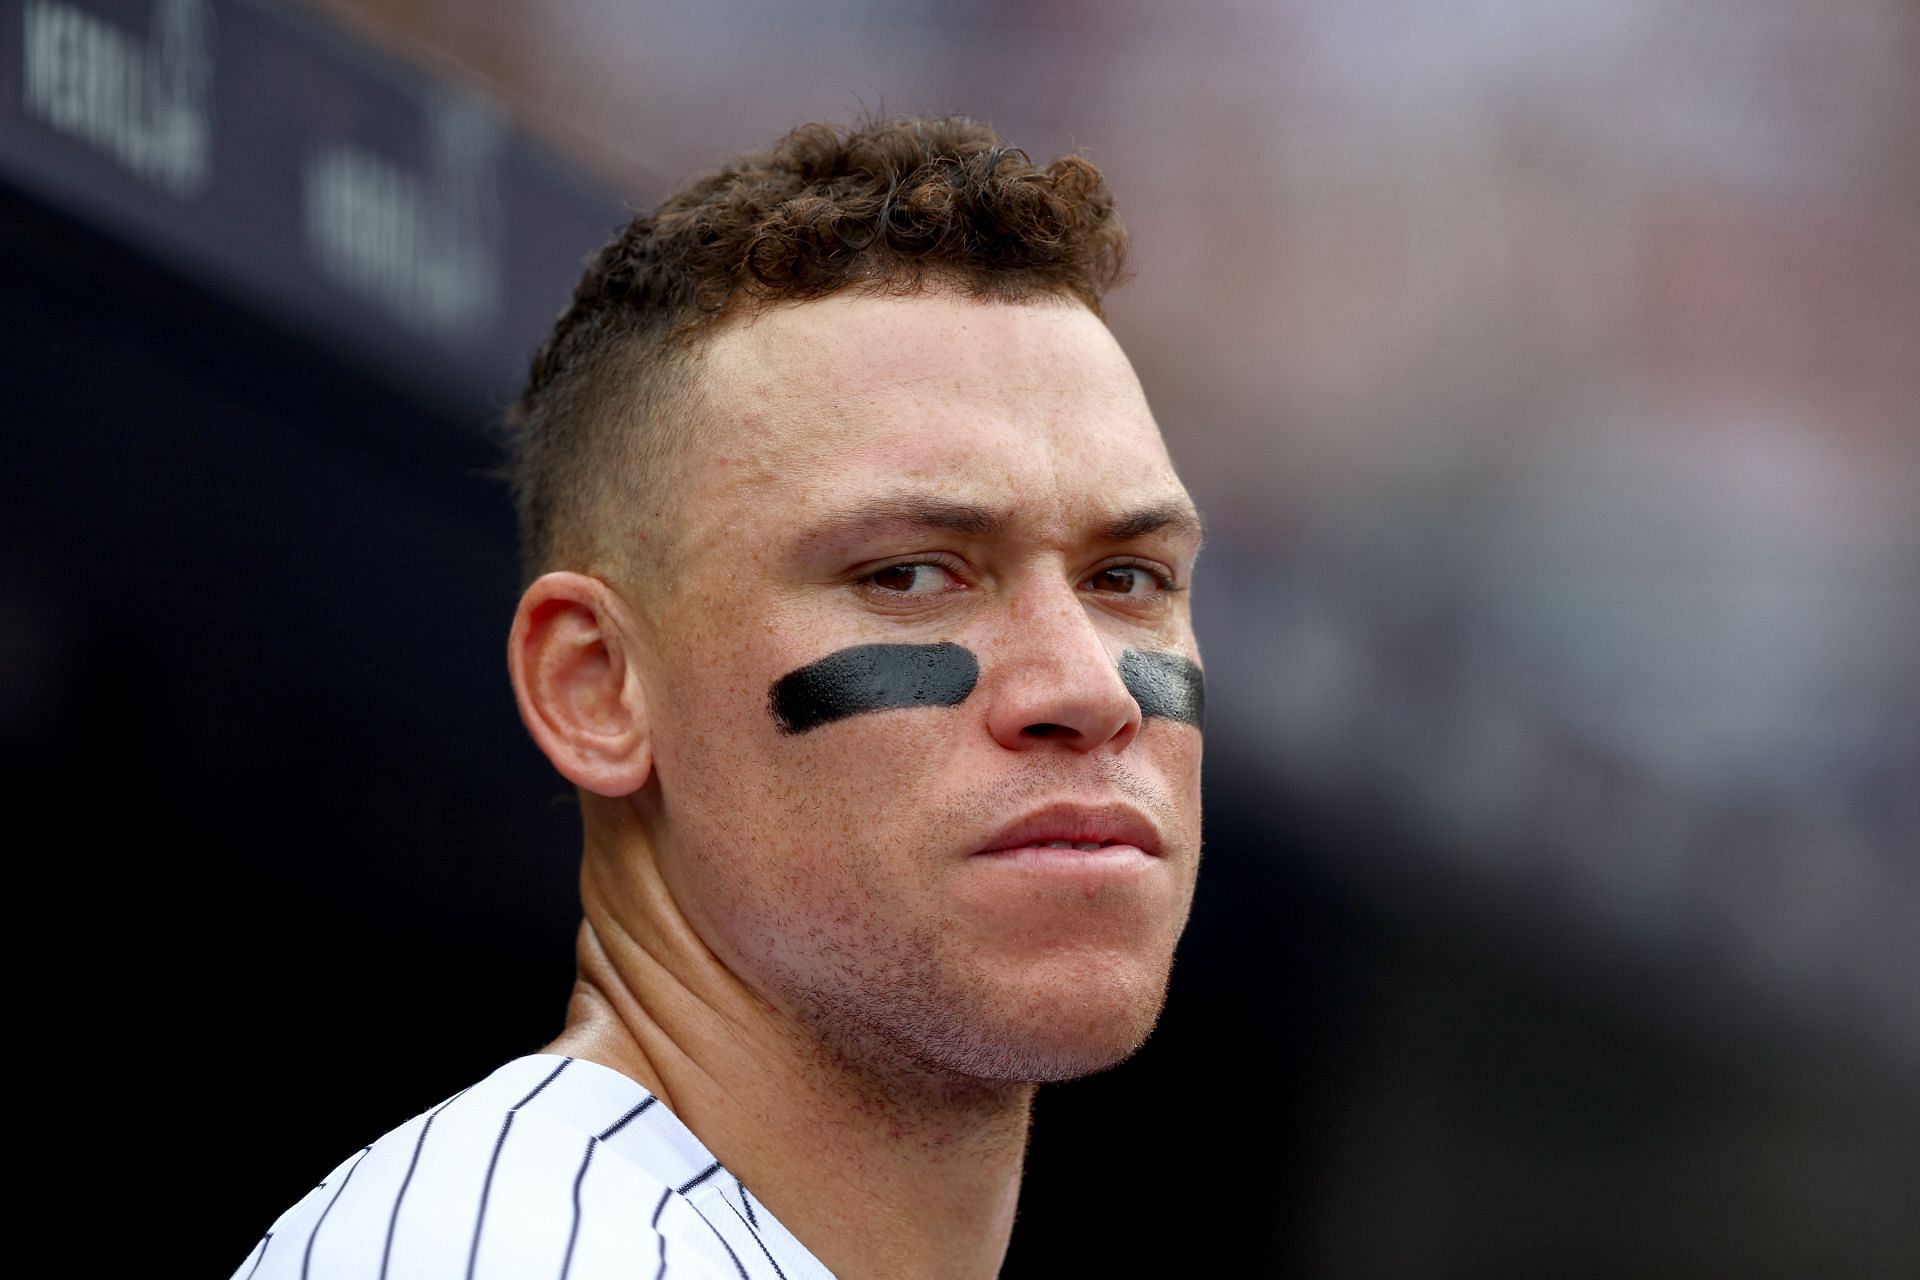 New York Yankees star Aaron Judge looks on from the dugout.